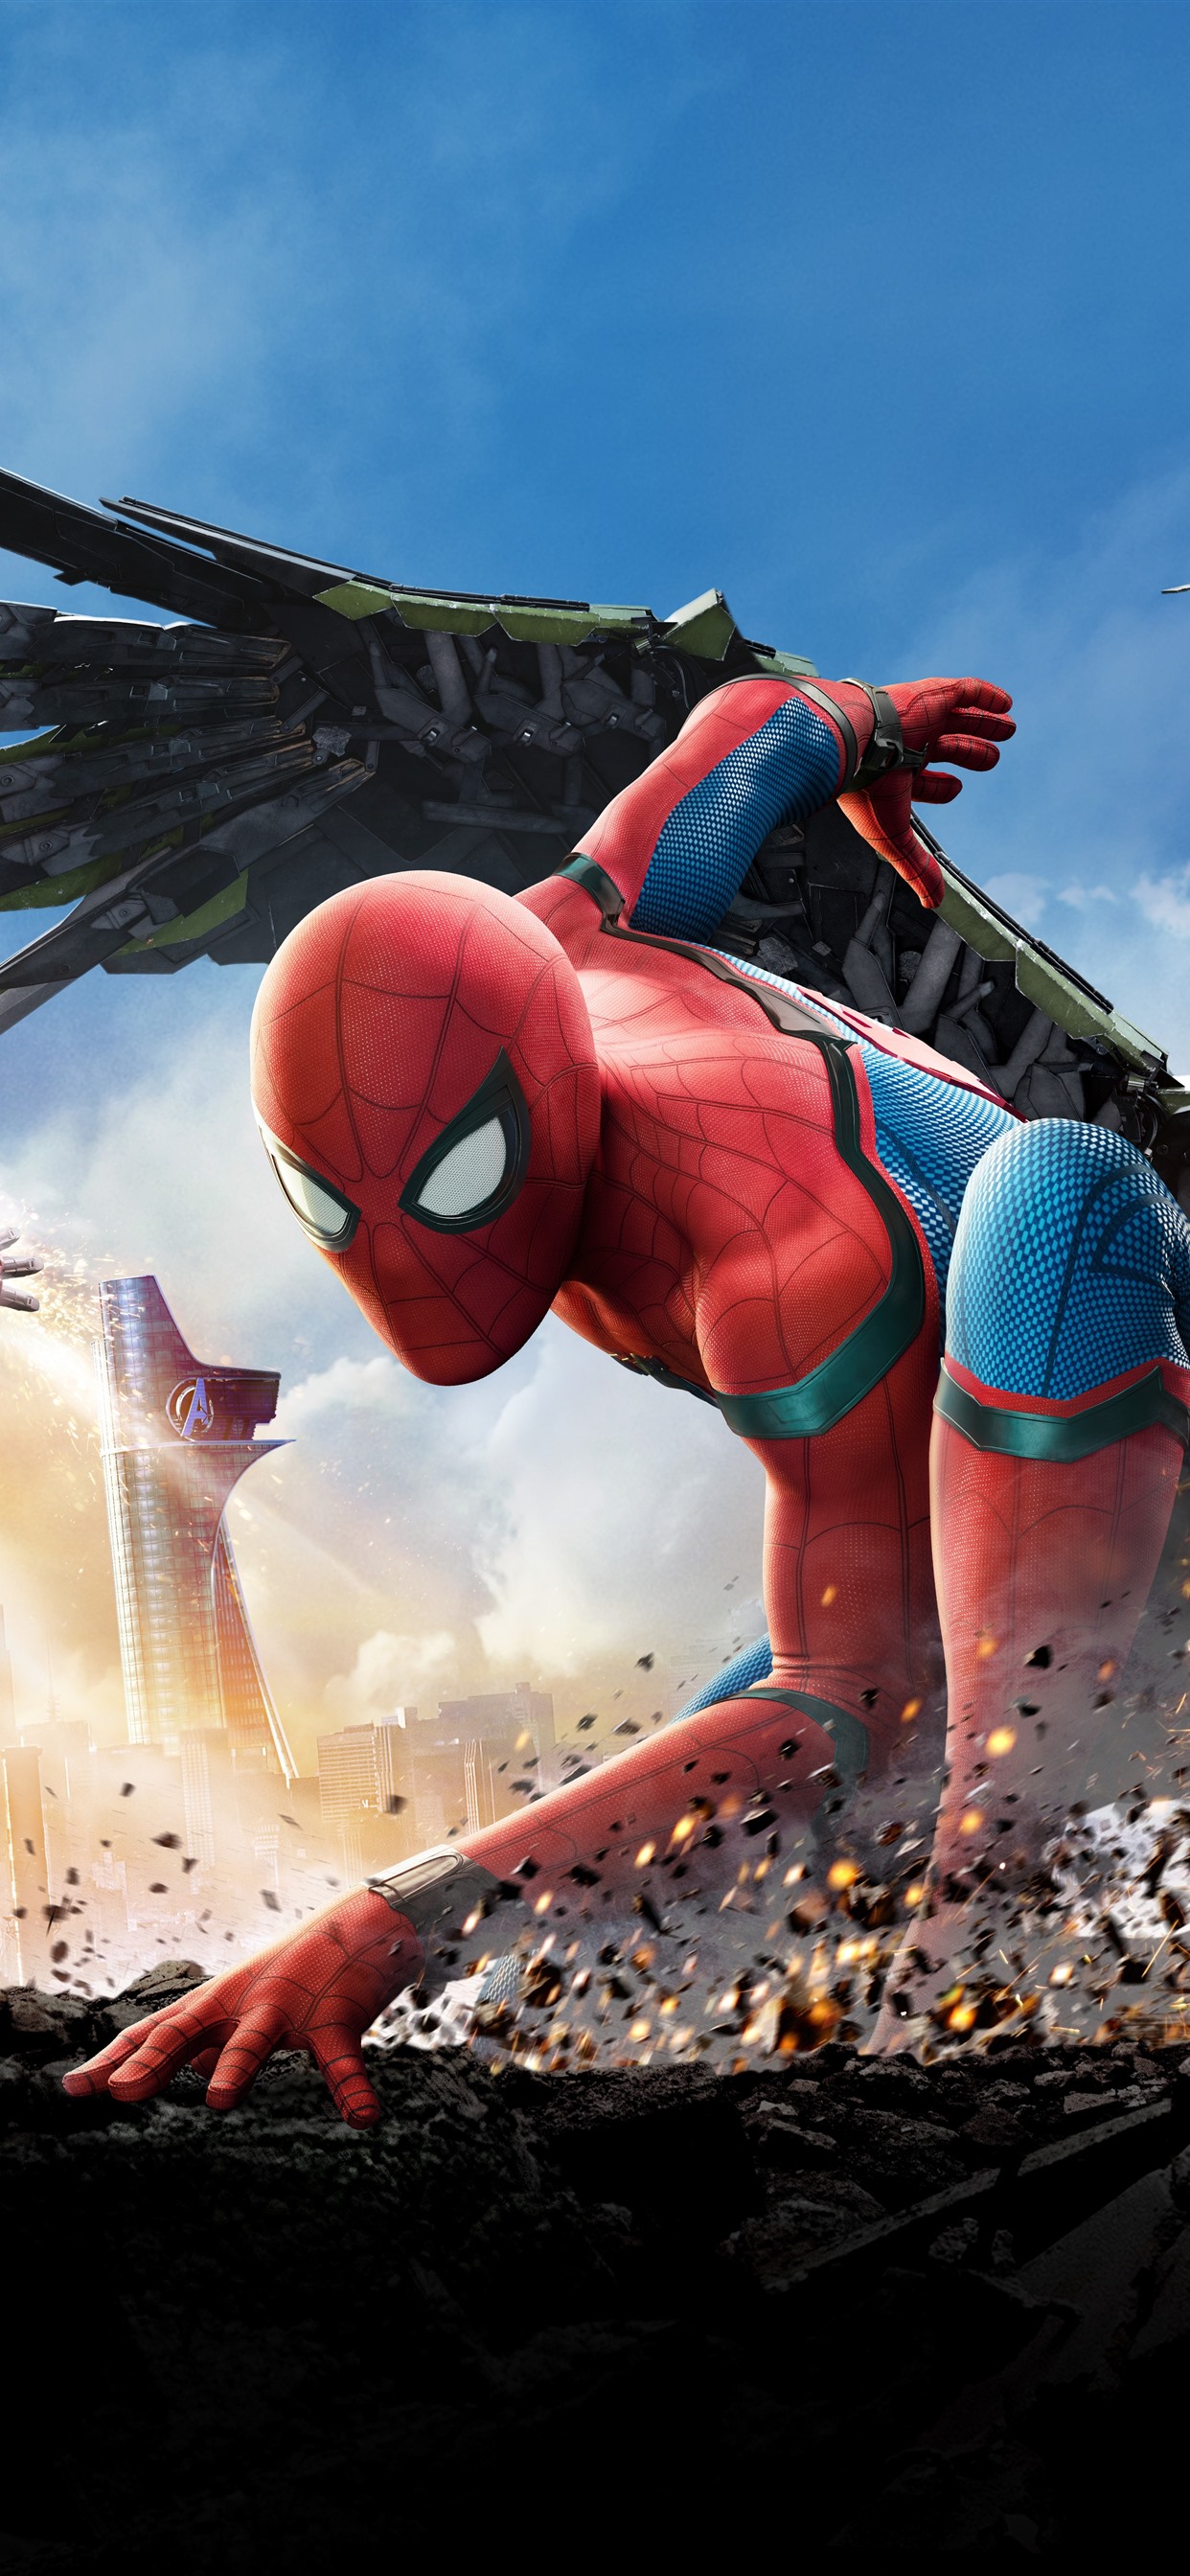 Iphone Wallpaper Spider-man And Iron Man - Iphone Homecoming Spider Man , HD Wallpaper & Backgrounds